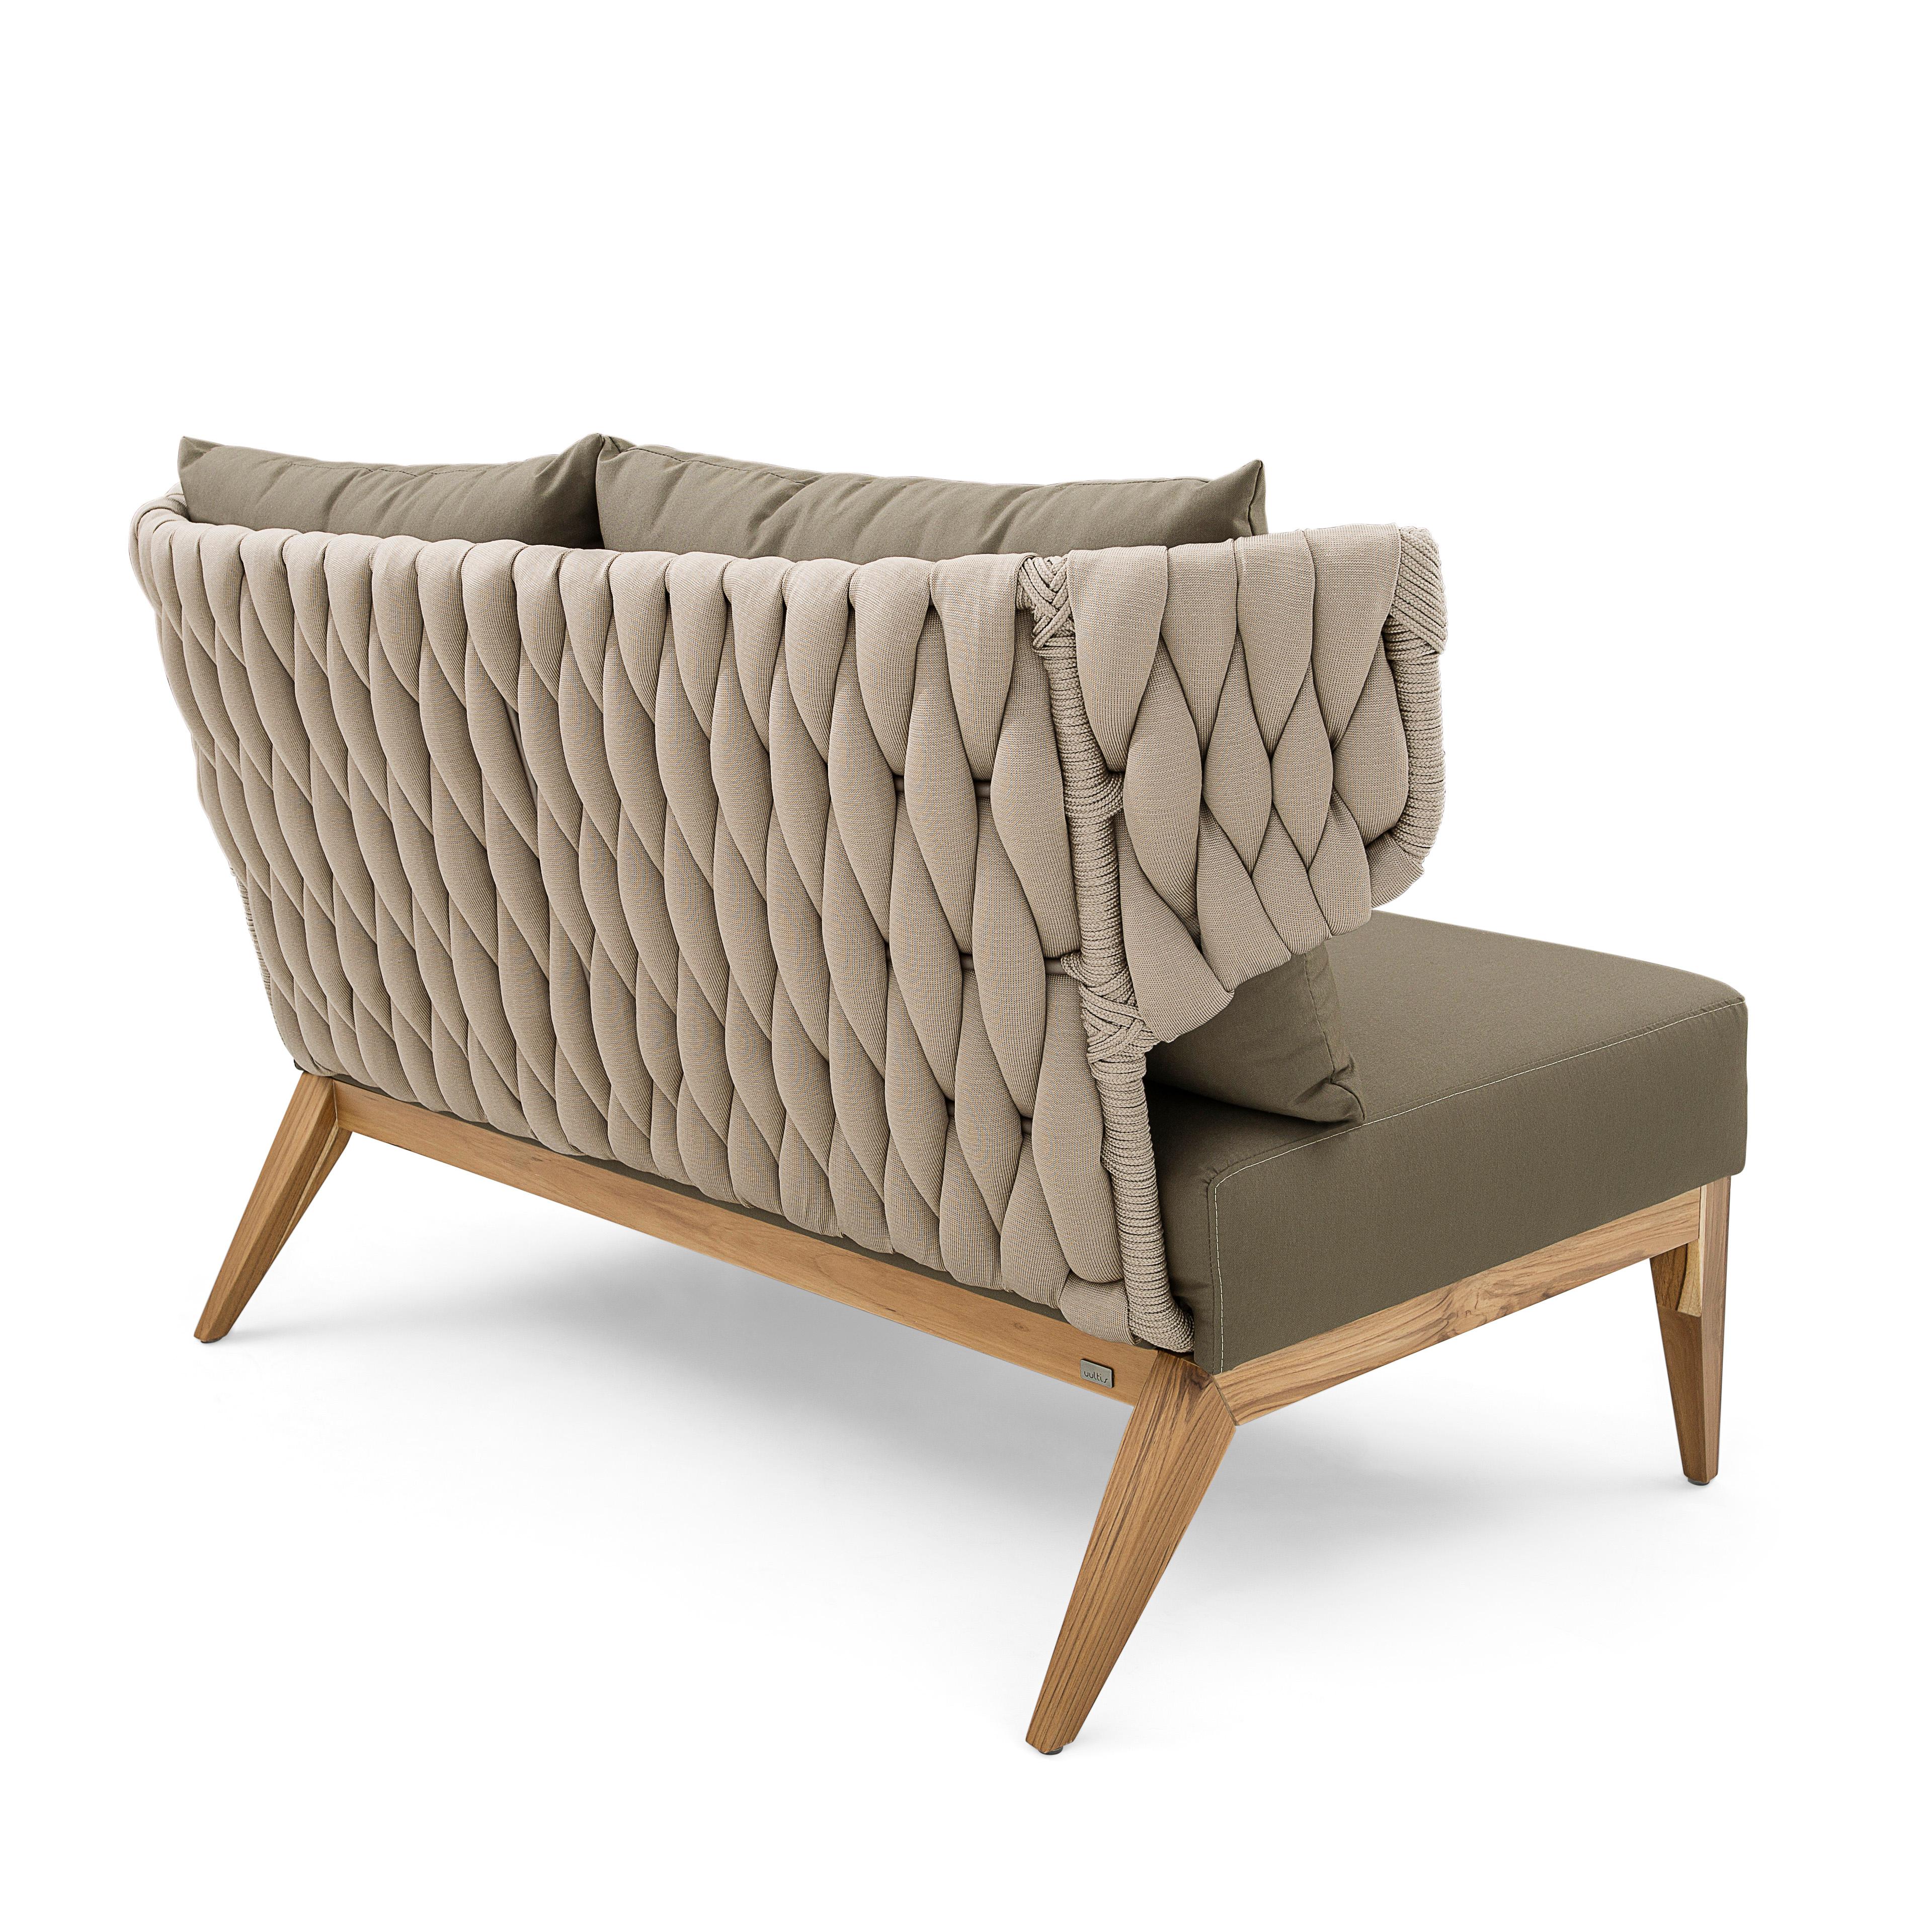 Beluga Outdoor Loveseat in Olive Green fabric and Teak wood In New Condition For Sale In Miami, FL